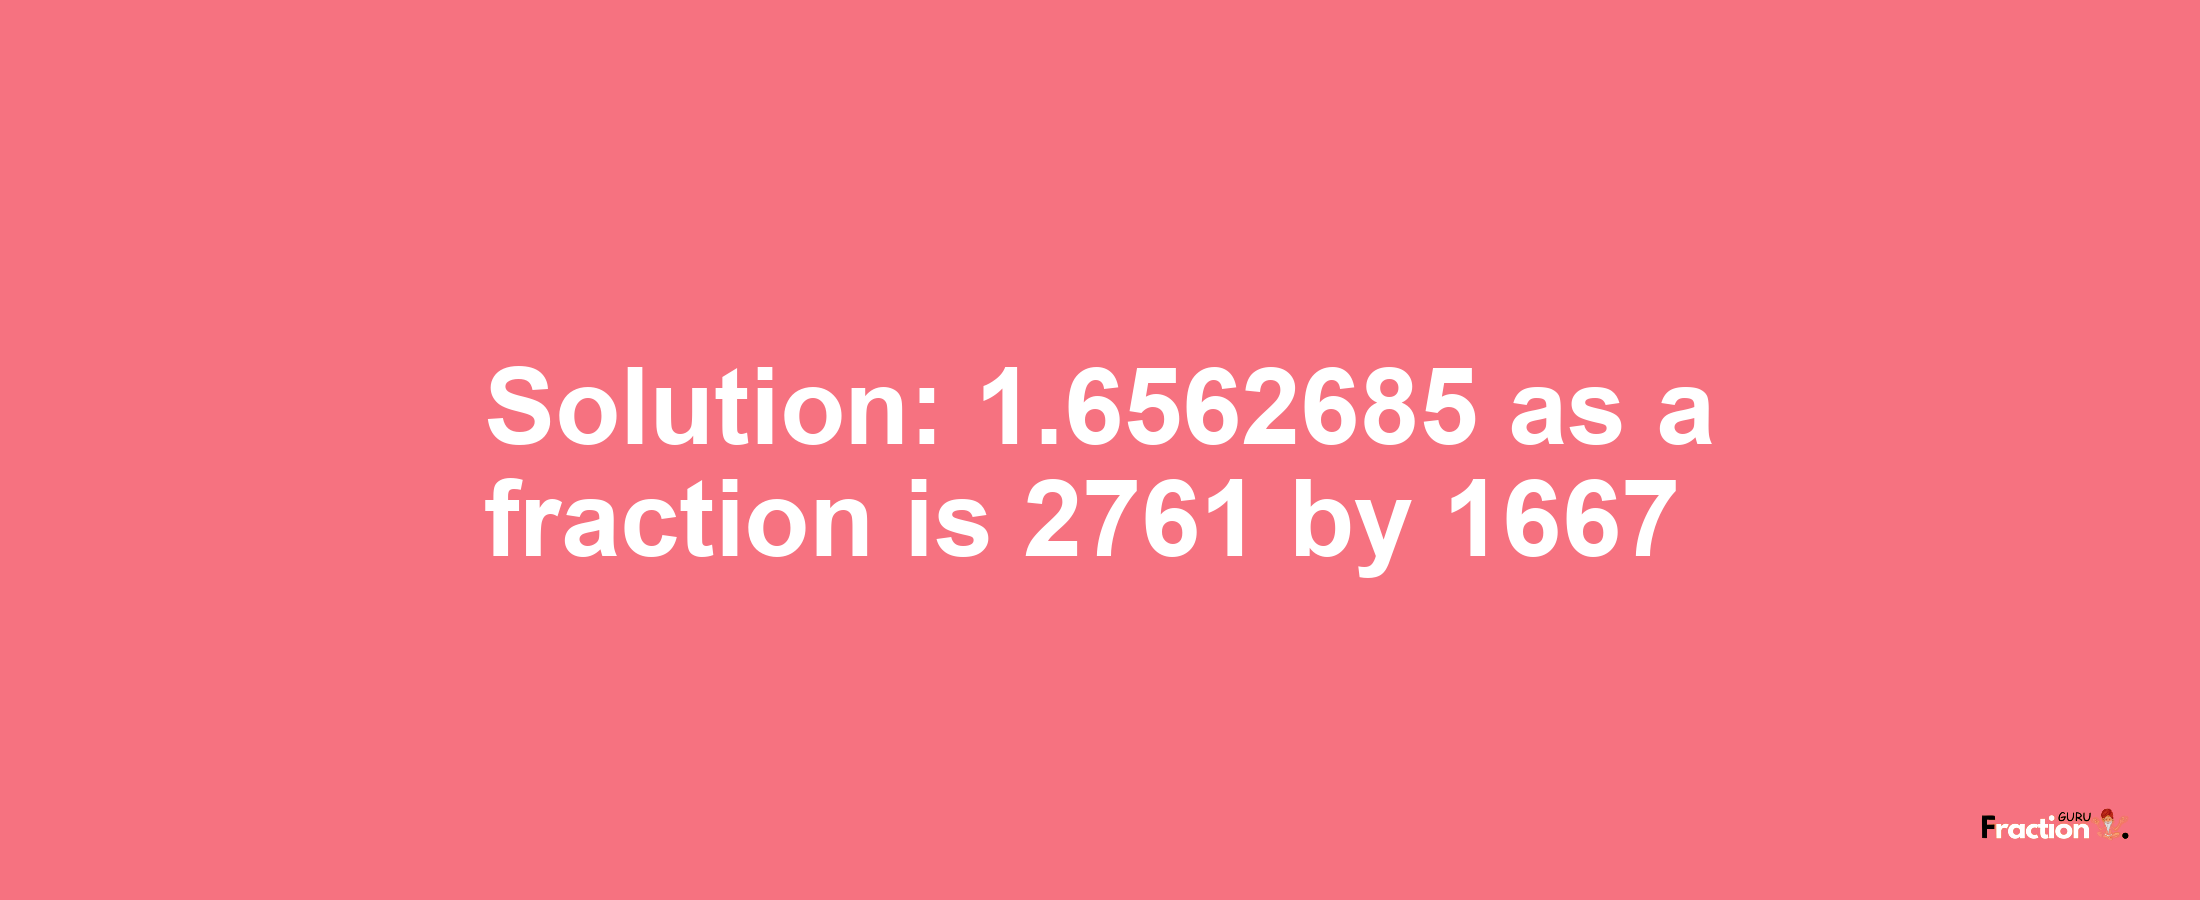 Solution:1.6562685 as a fraction is 2761/1667